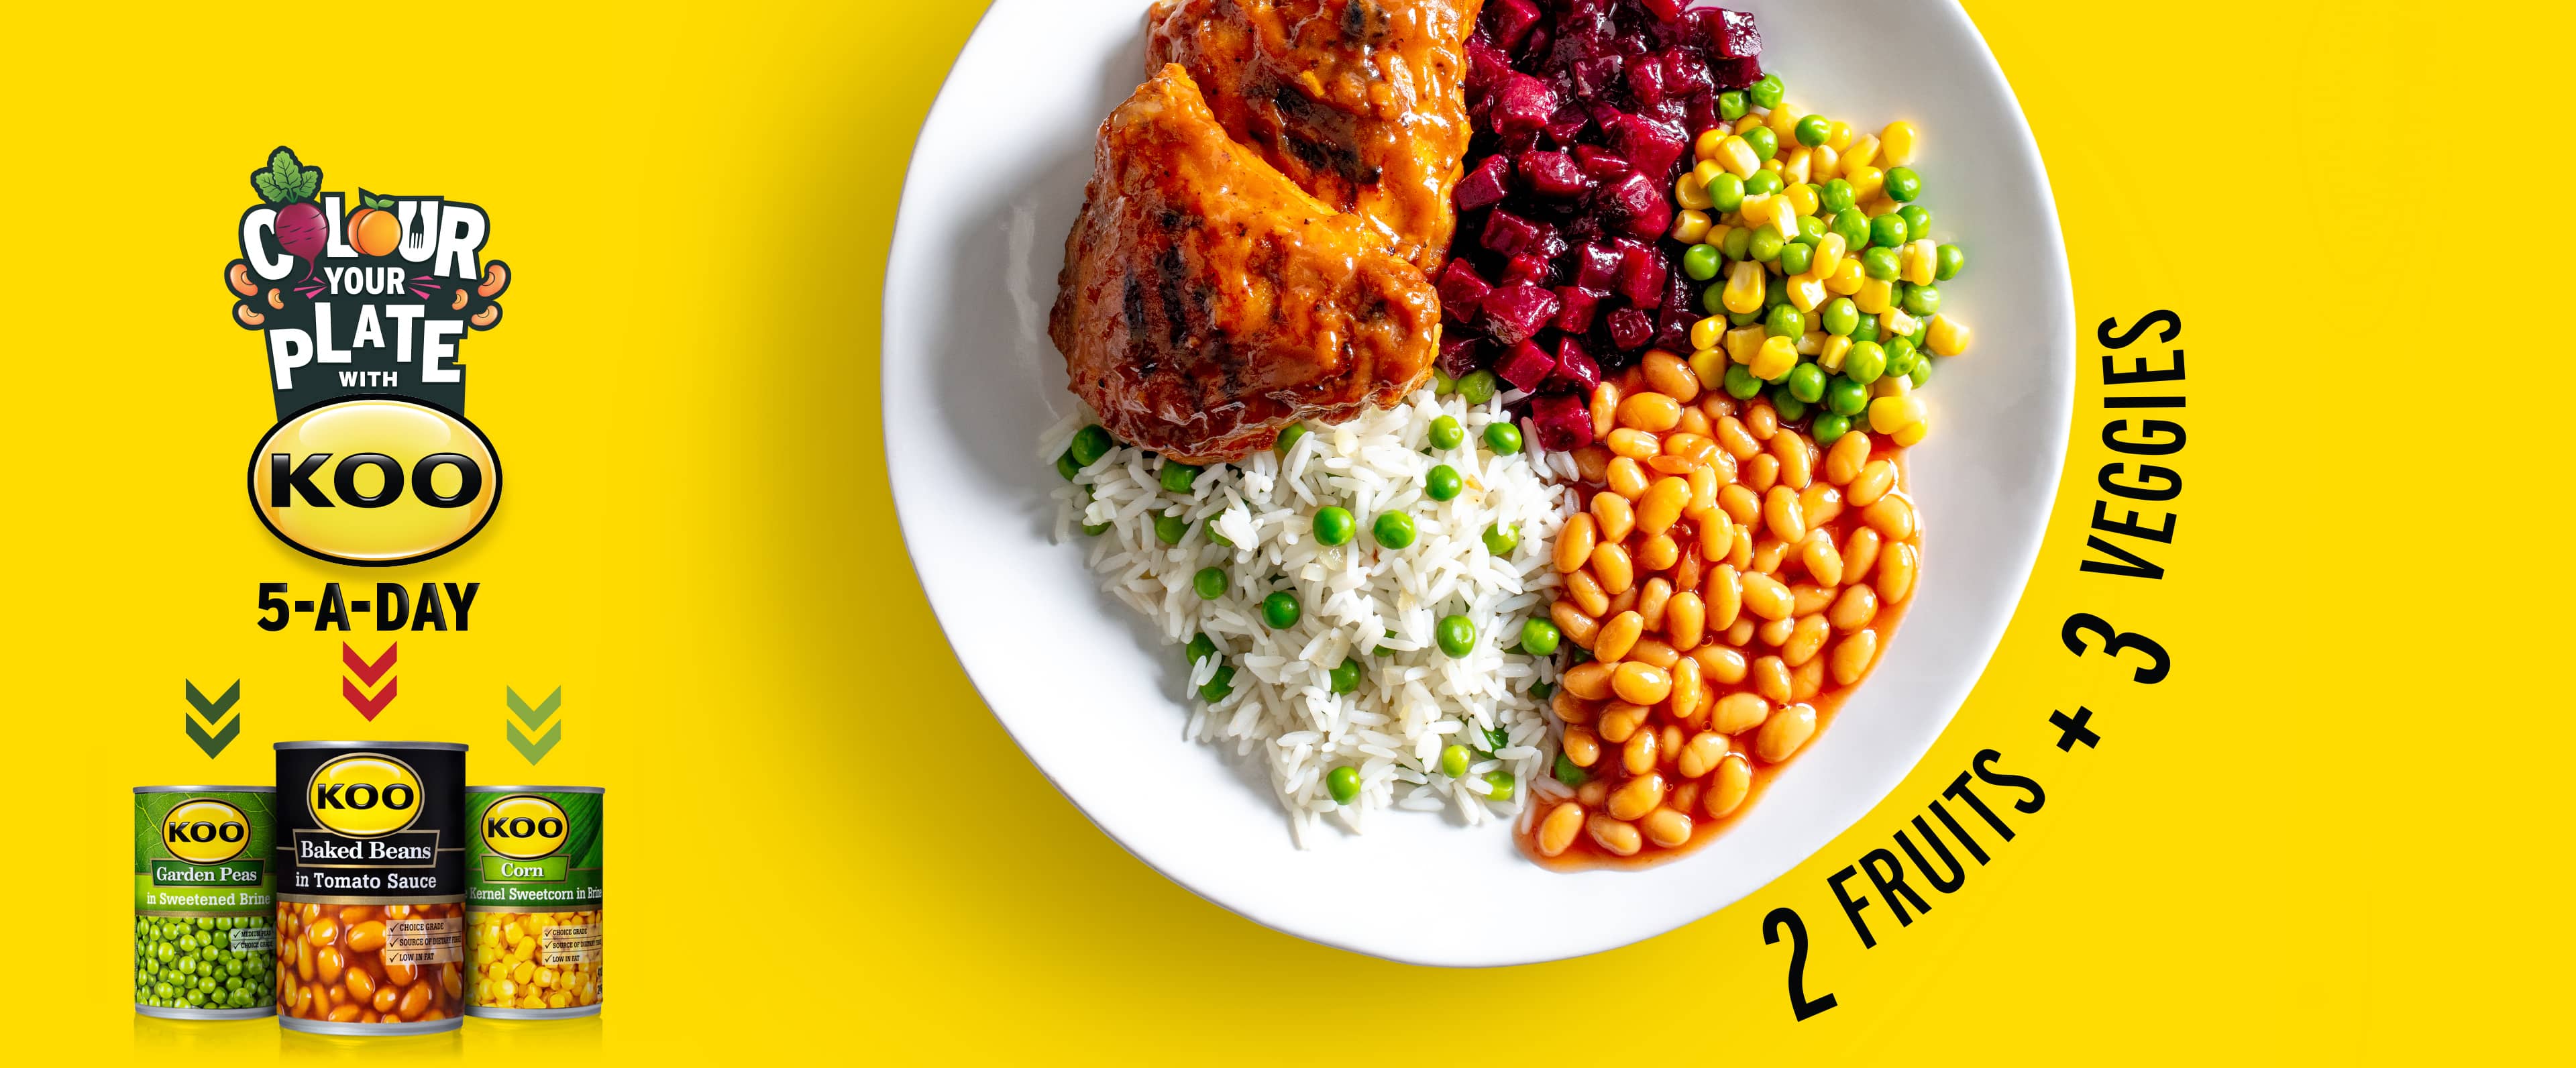 A plate of food containing roast chicken and vegetables on the side which include beetroot, corn, peas and baked beans